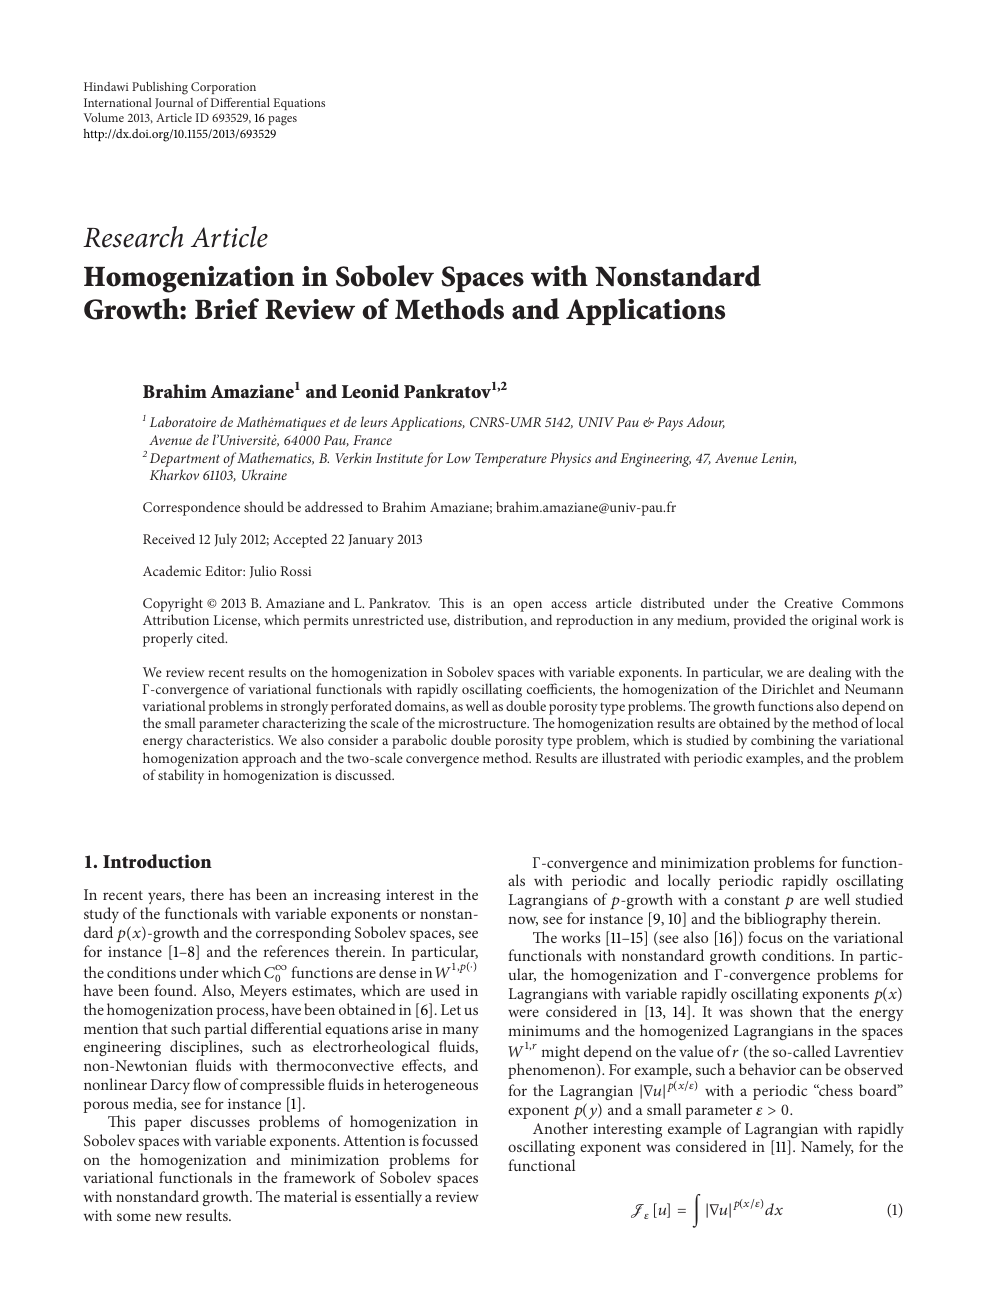 Homogenization In Sobolev Spaces With Nonstandard Growth Brief Review Of Methods And Applications Topic Of Research Paper In Mathematics Download Scholarly Article Pdf And Read For Free On Cyberleninka Open Science